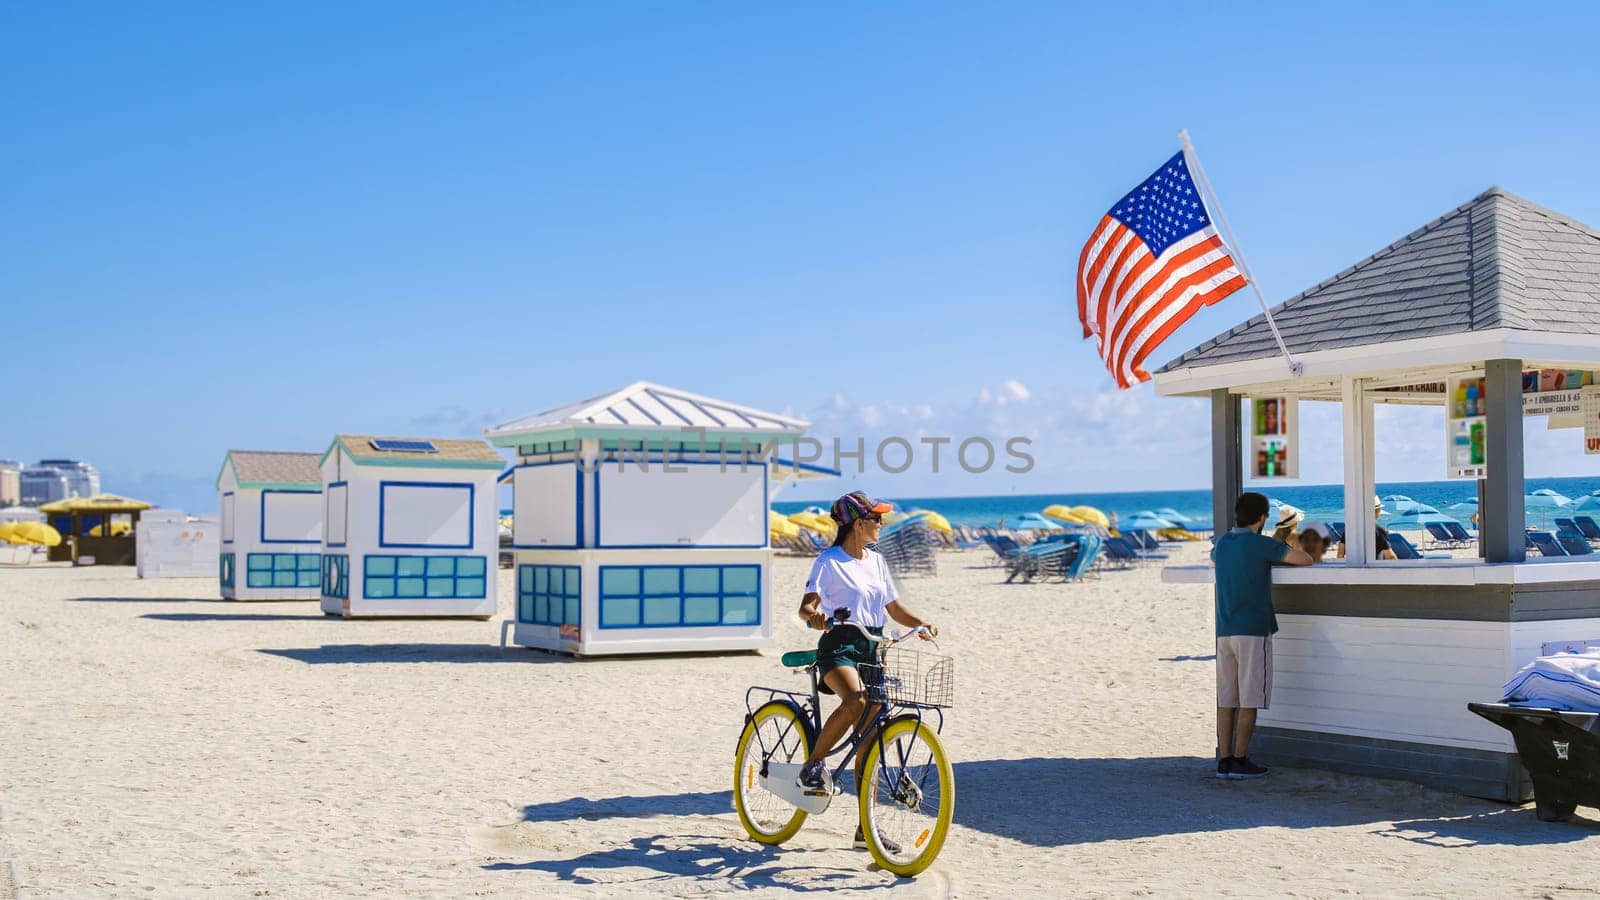 Young women on the beach in Miami with a bicycle, a colorful Miami beach, and a Lifeguard hut in South Beach, Florida. Asian women bicycle on the beach